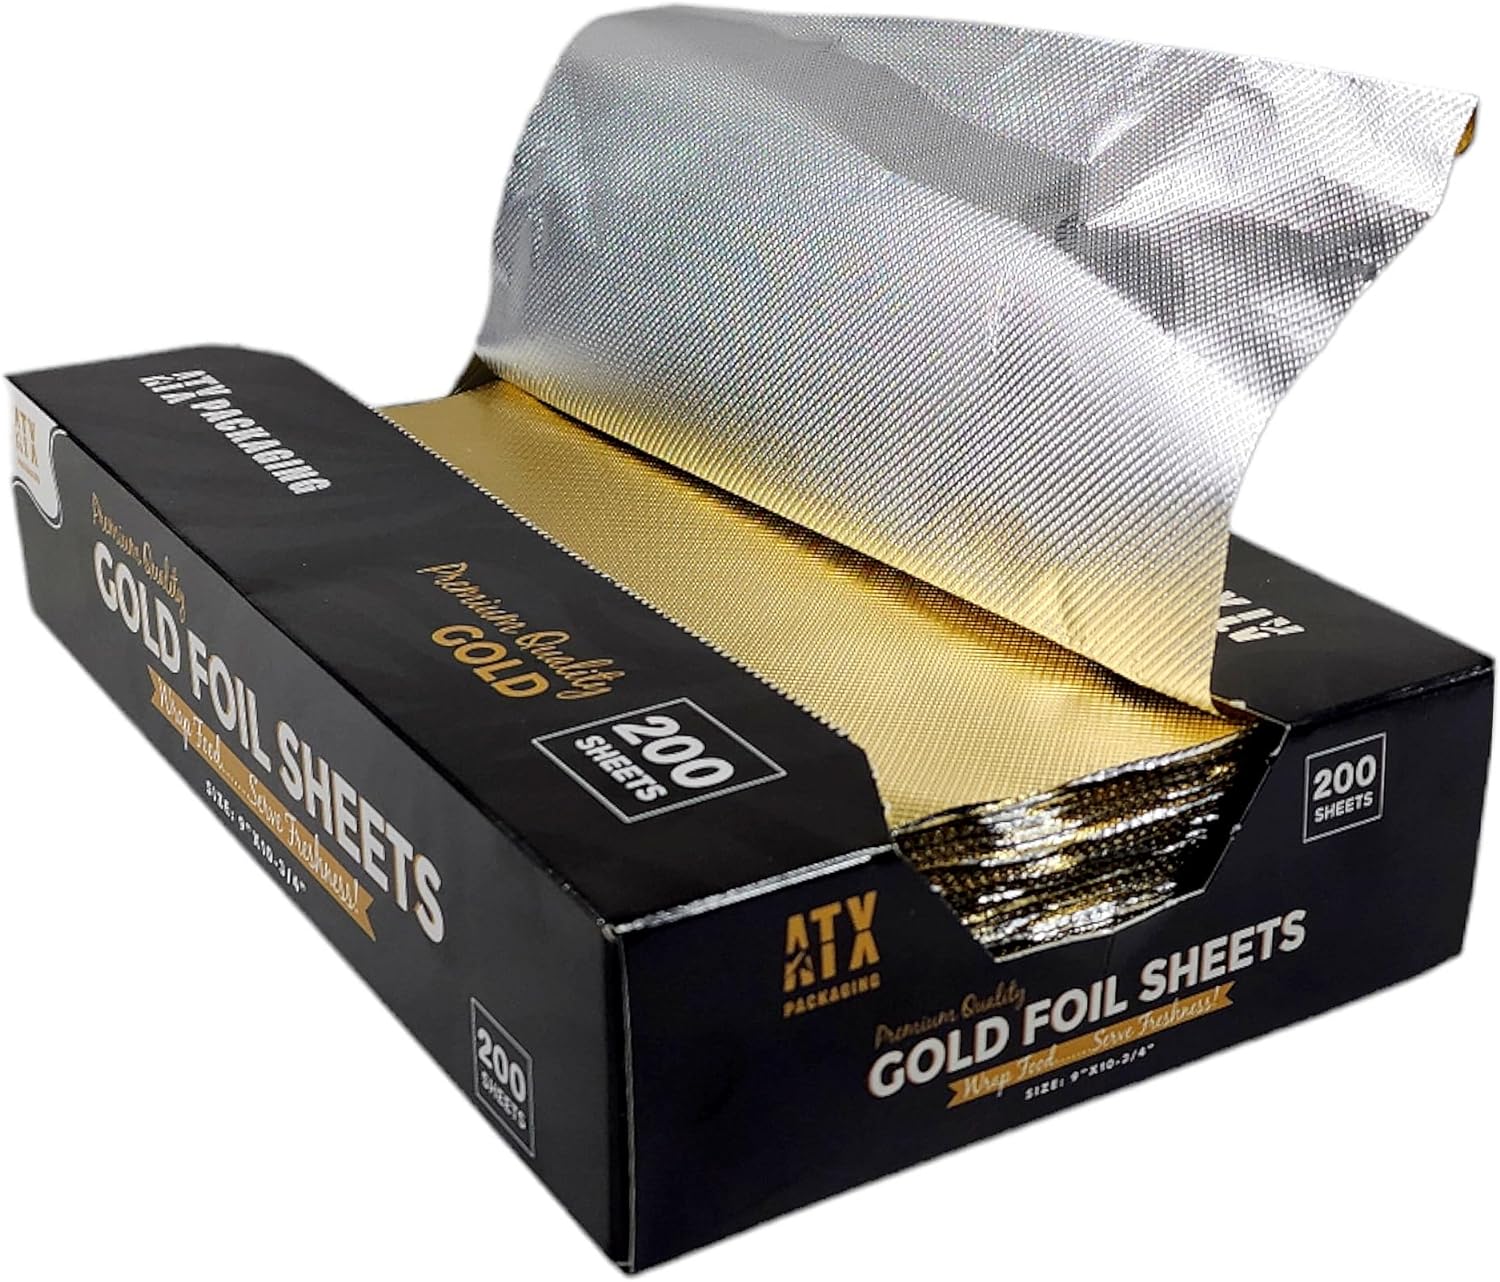 Choice 9 x 10 3/4 Gold / Silver Food Service Interfolded Pop-Up Foil  Sheets